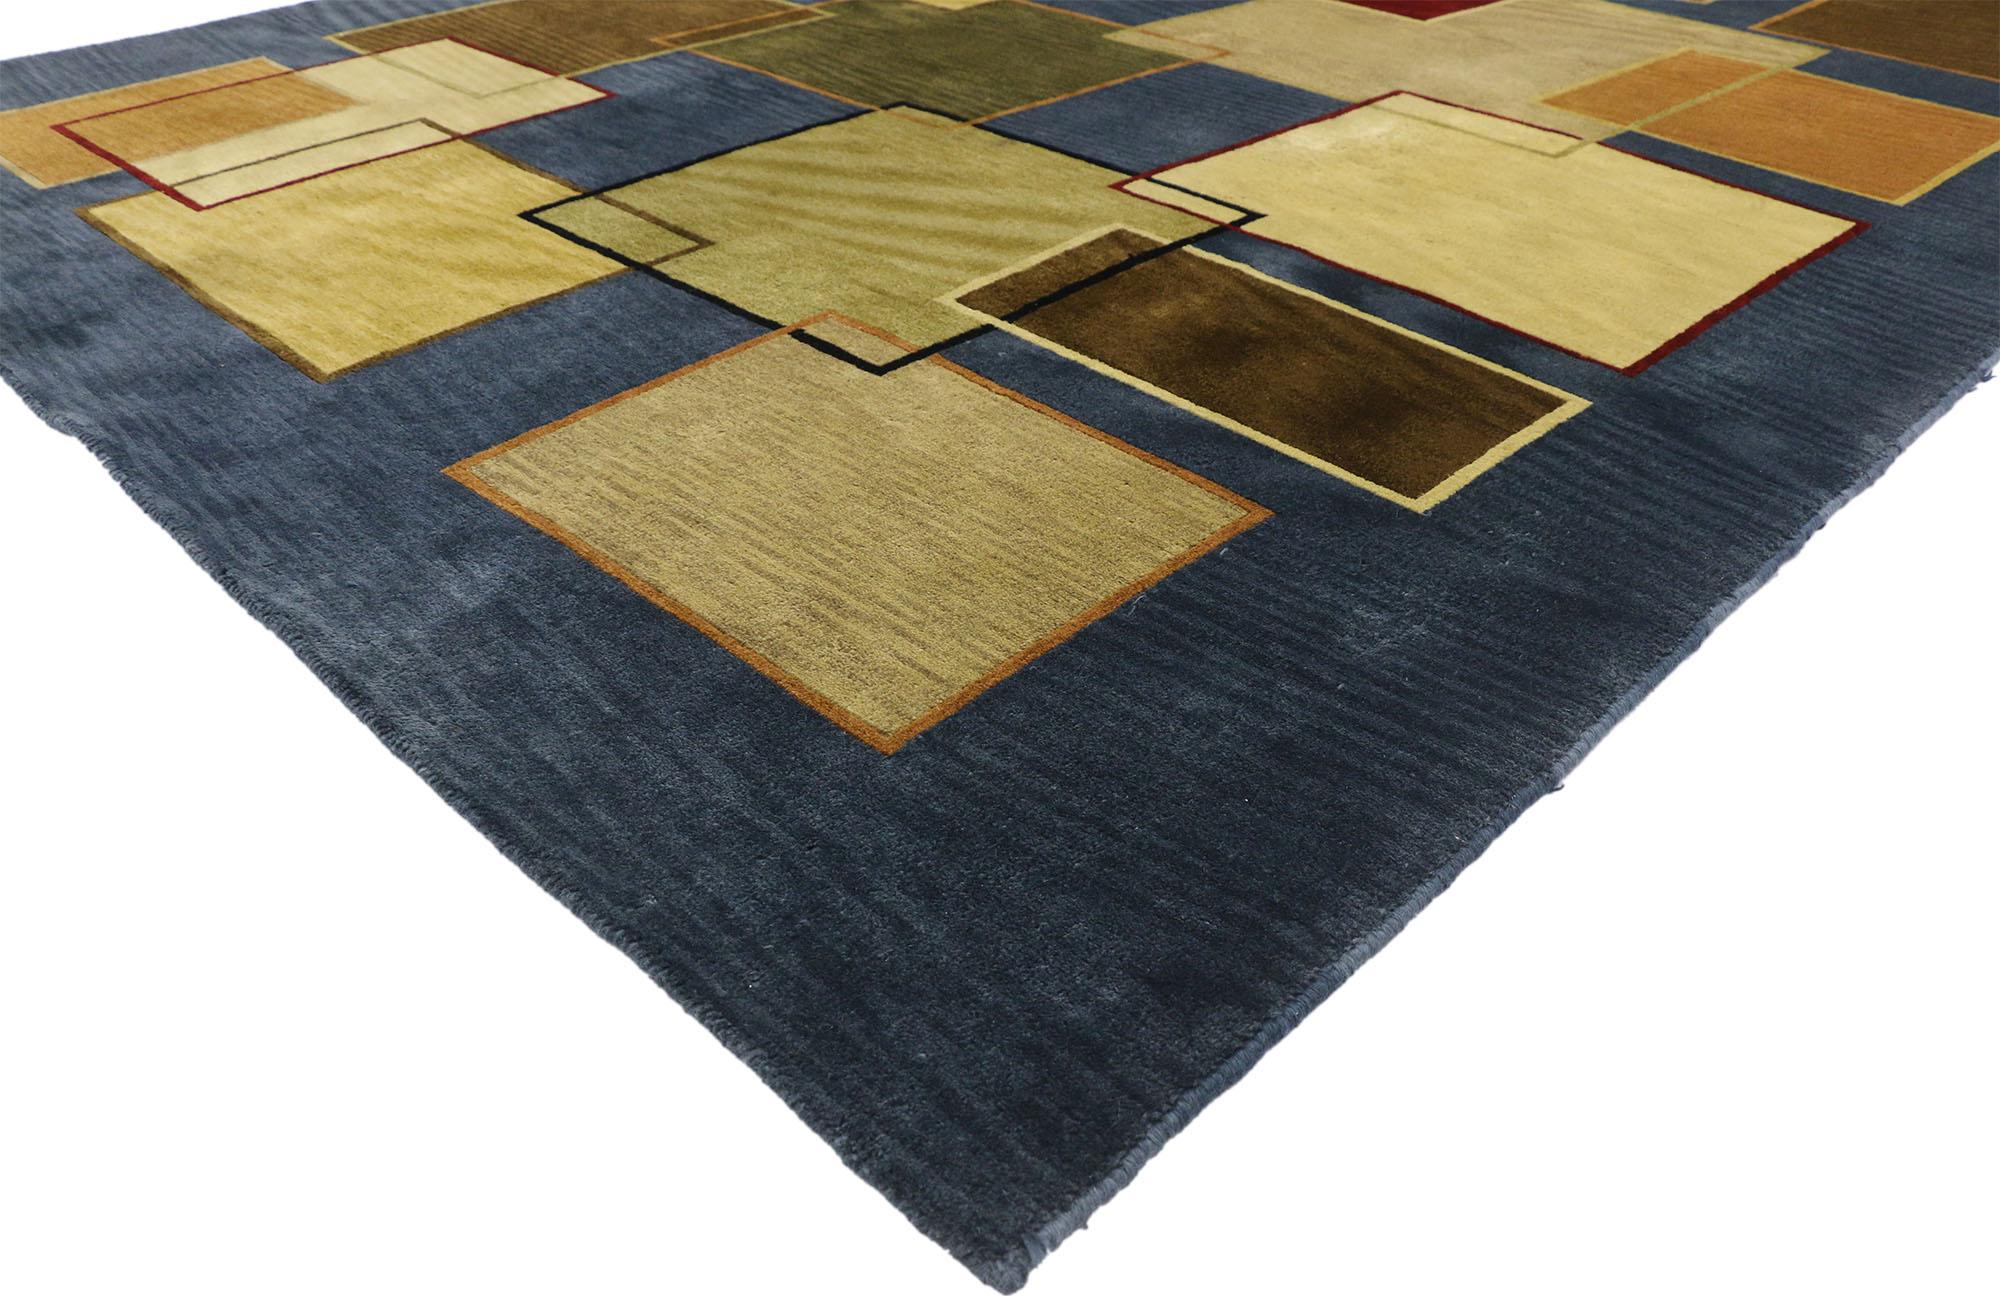 77242 Vintage Mid-Century Modern Style Rug with Cubism and Bauhaus Design 08'04 x 11'06. This hand knotted wool vintage Tibetan Art Deco style rug features a striking design composed of a variety of colorful overlapping rectangles and squares set